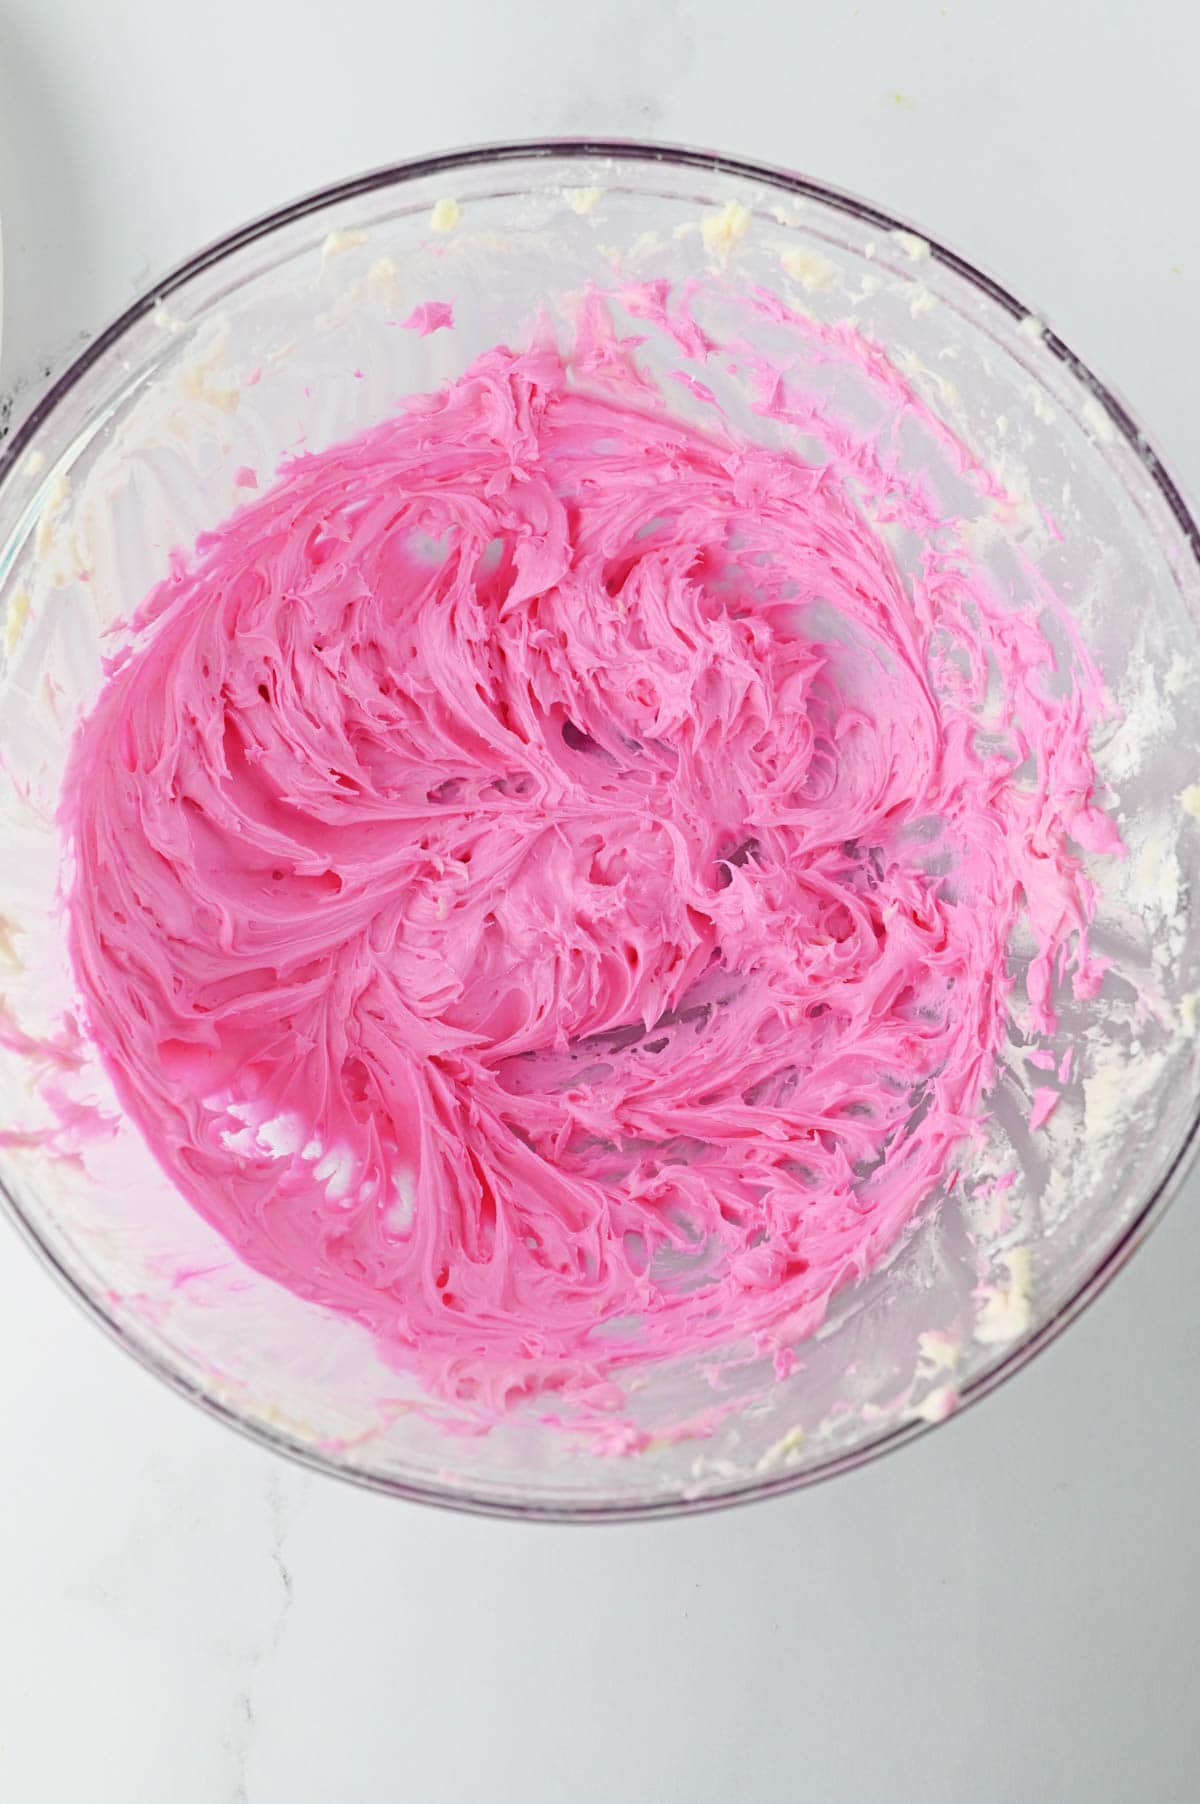 Buttercream frosting colored with pink food coloring